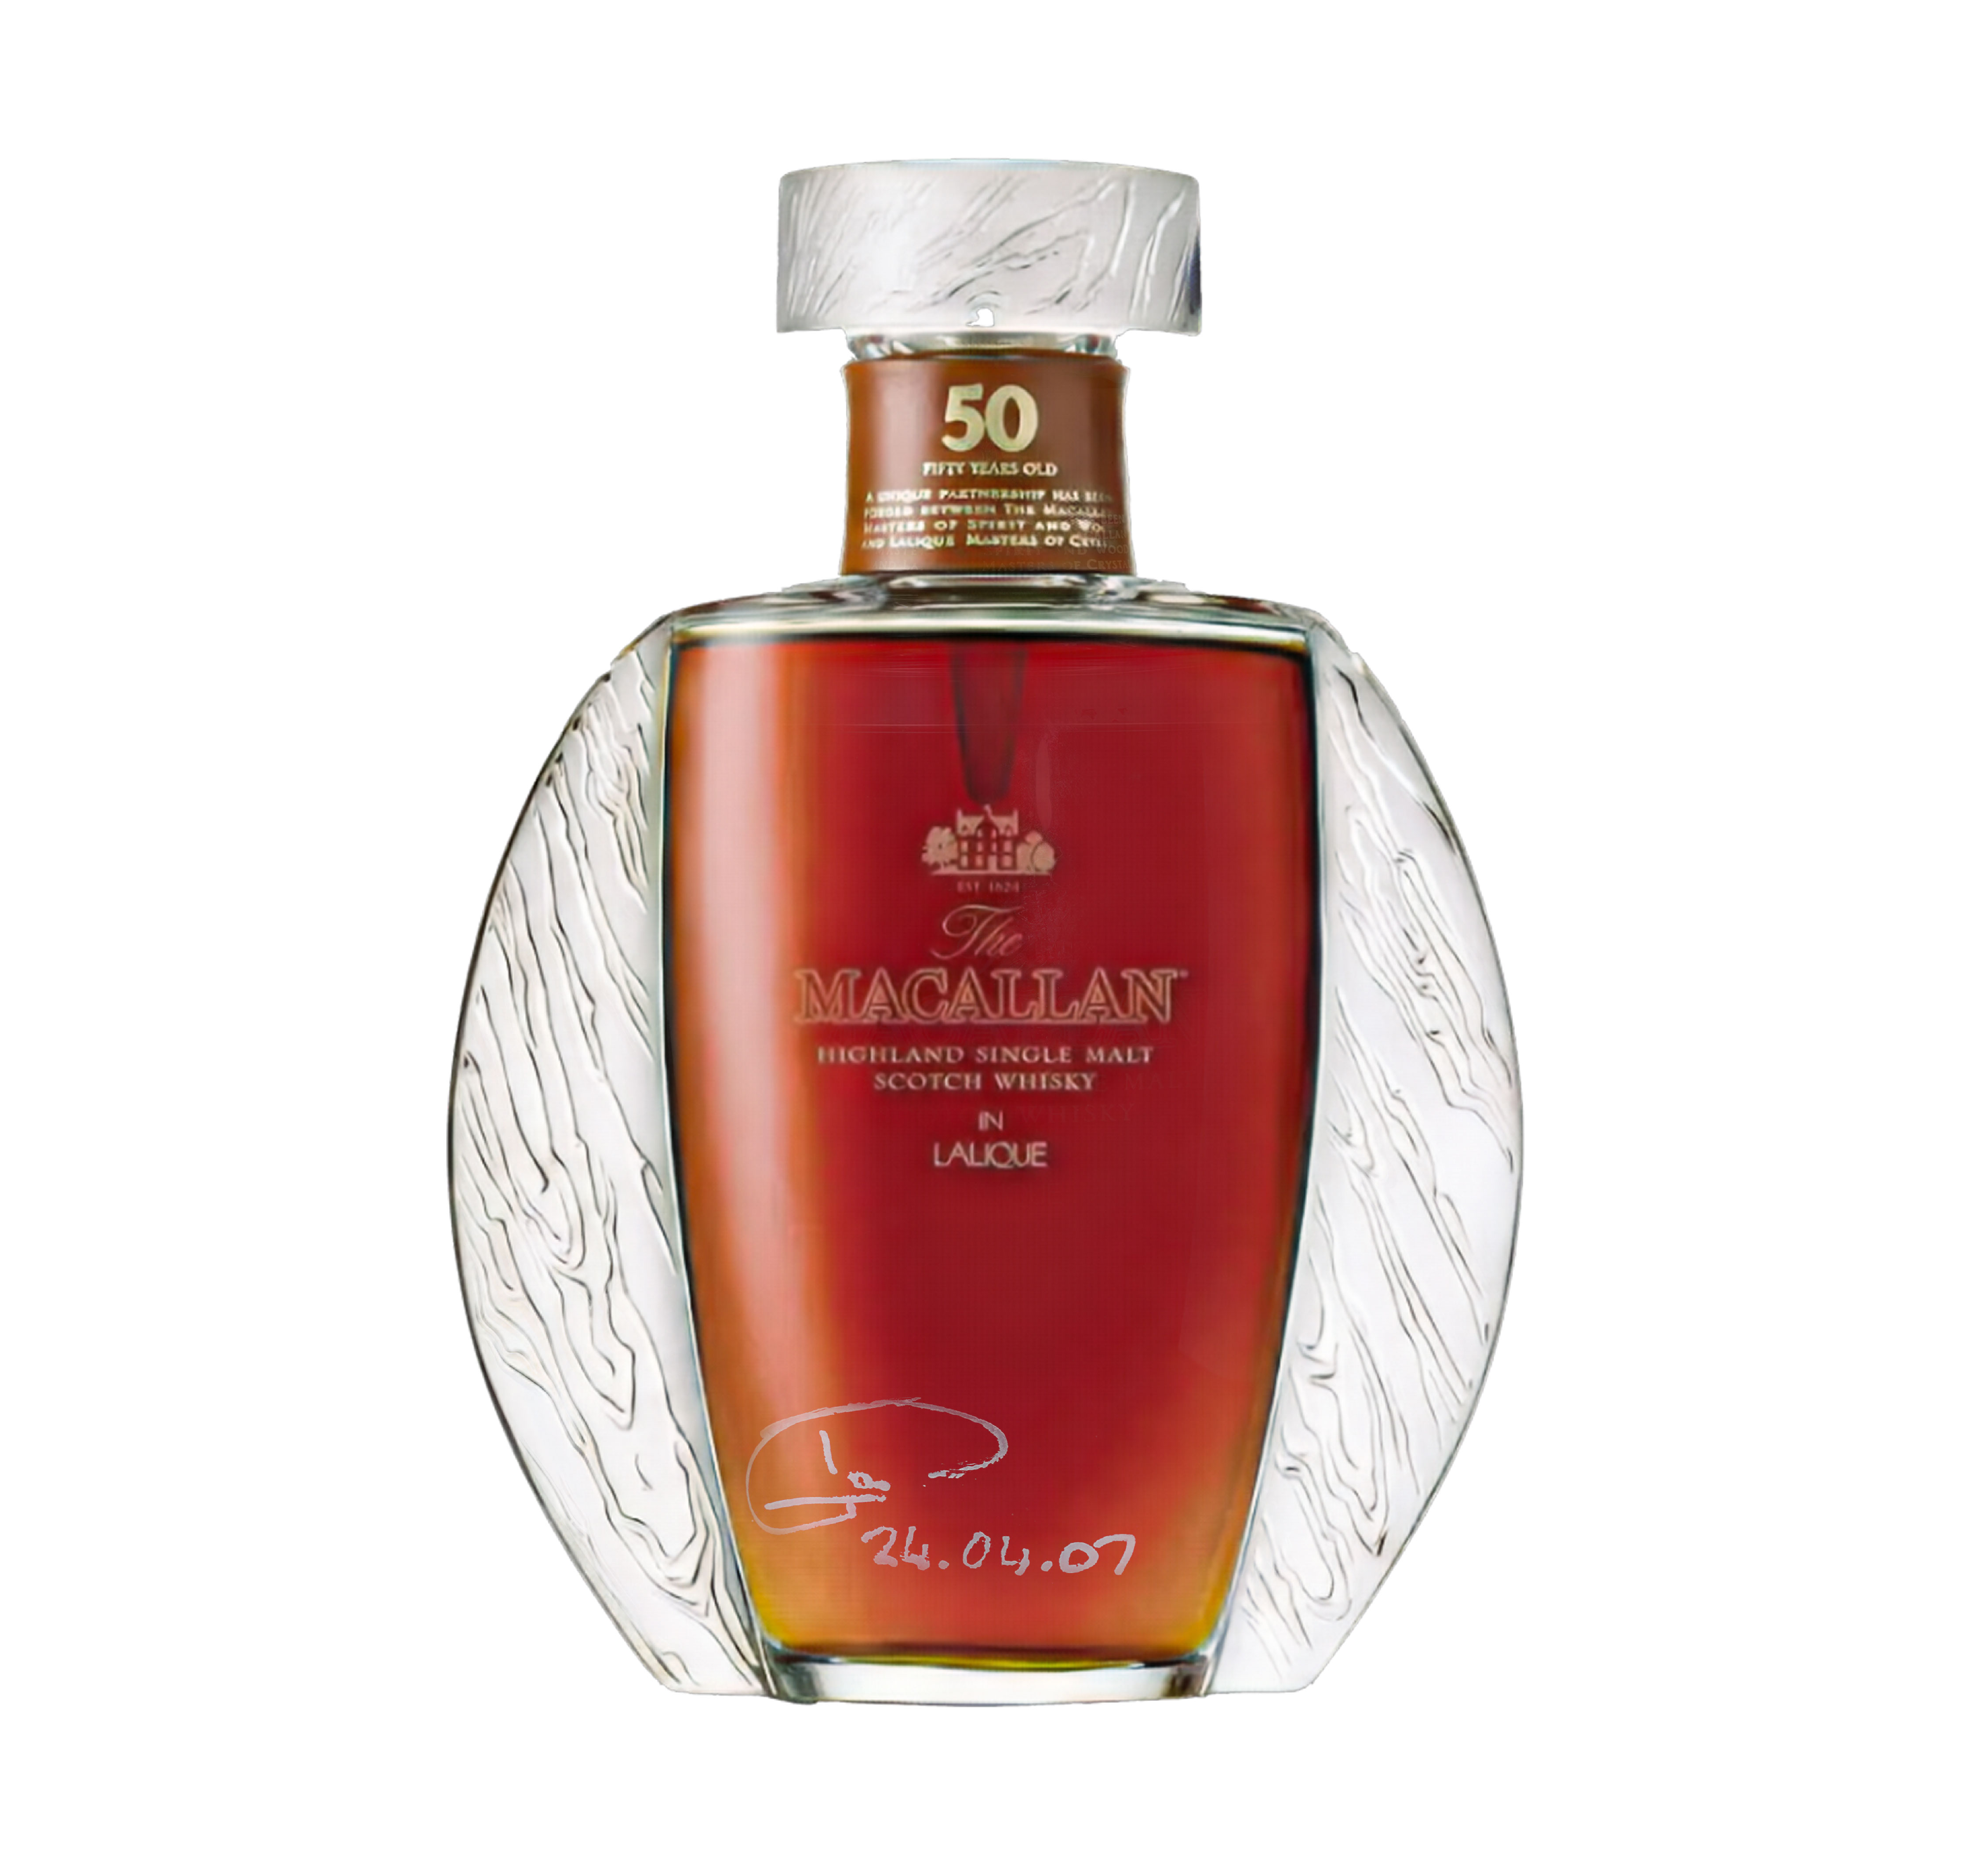 The Macallan Lalique 50 Years Old Single Malt Scotch Whisky